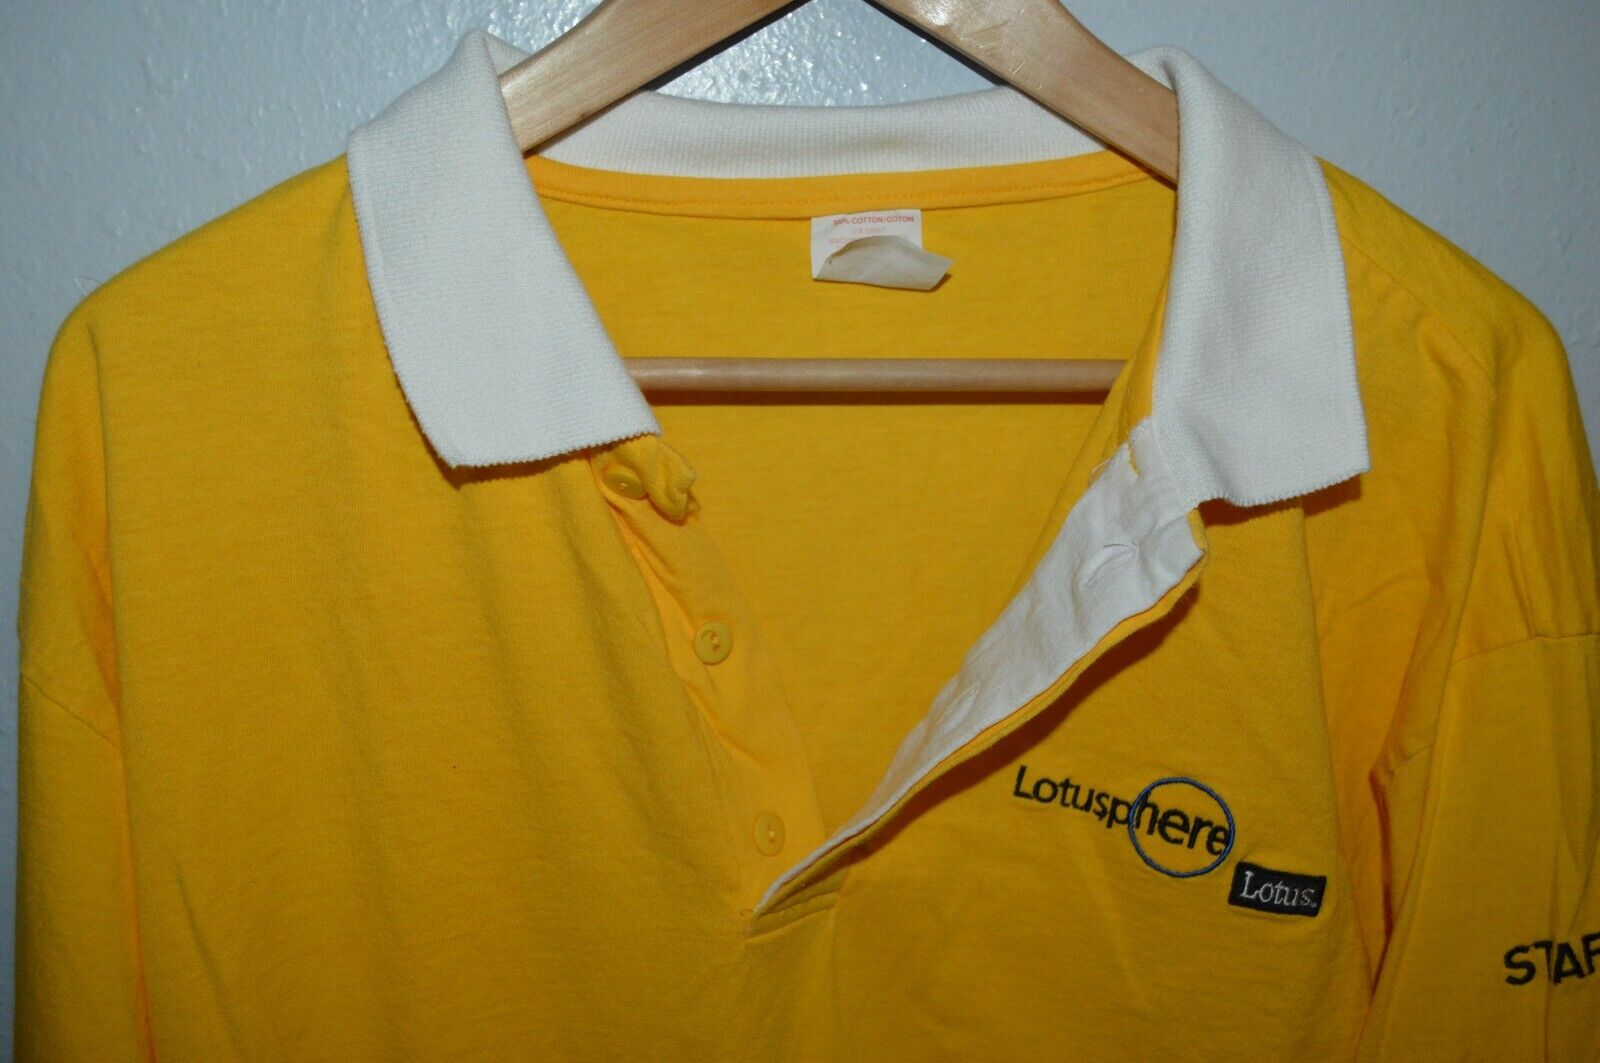 Vintage 90s Lotus Computer rugby T Shirt mens XL Tech Lotusphere software Staff